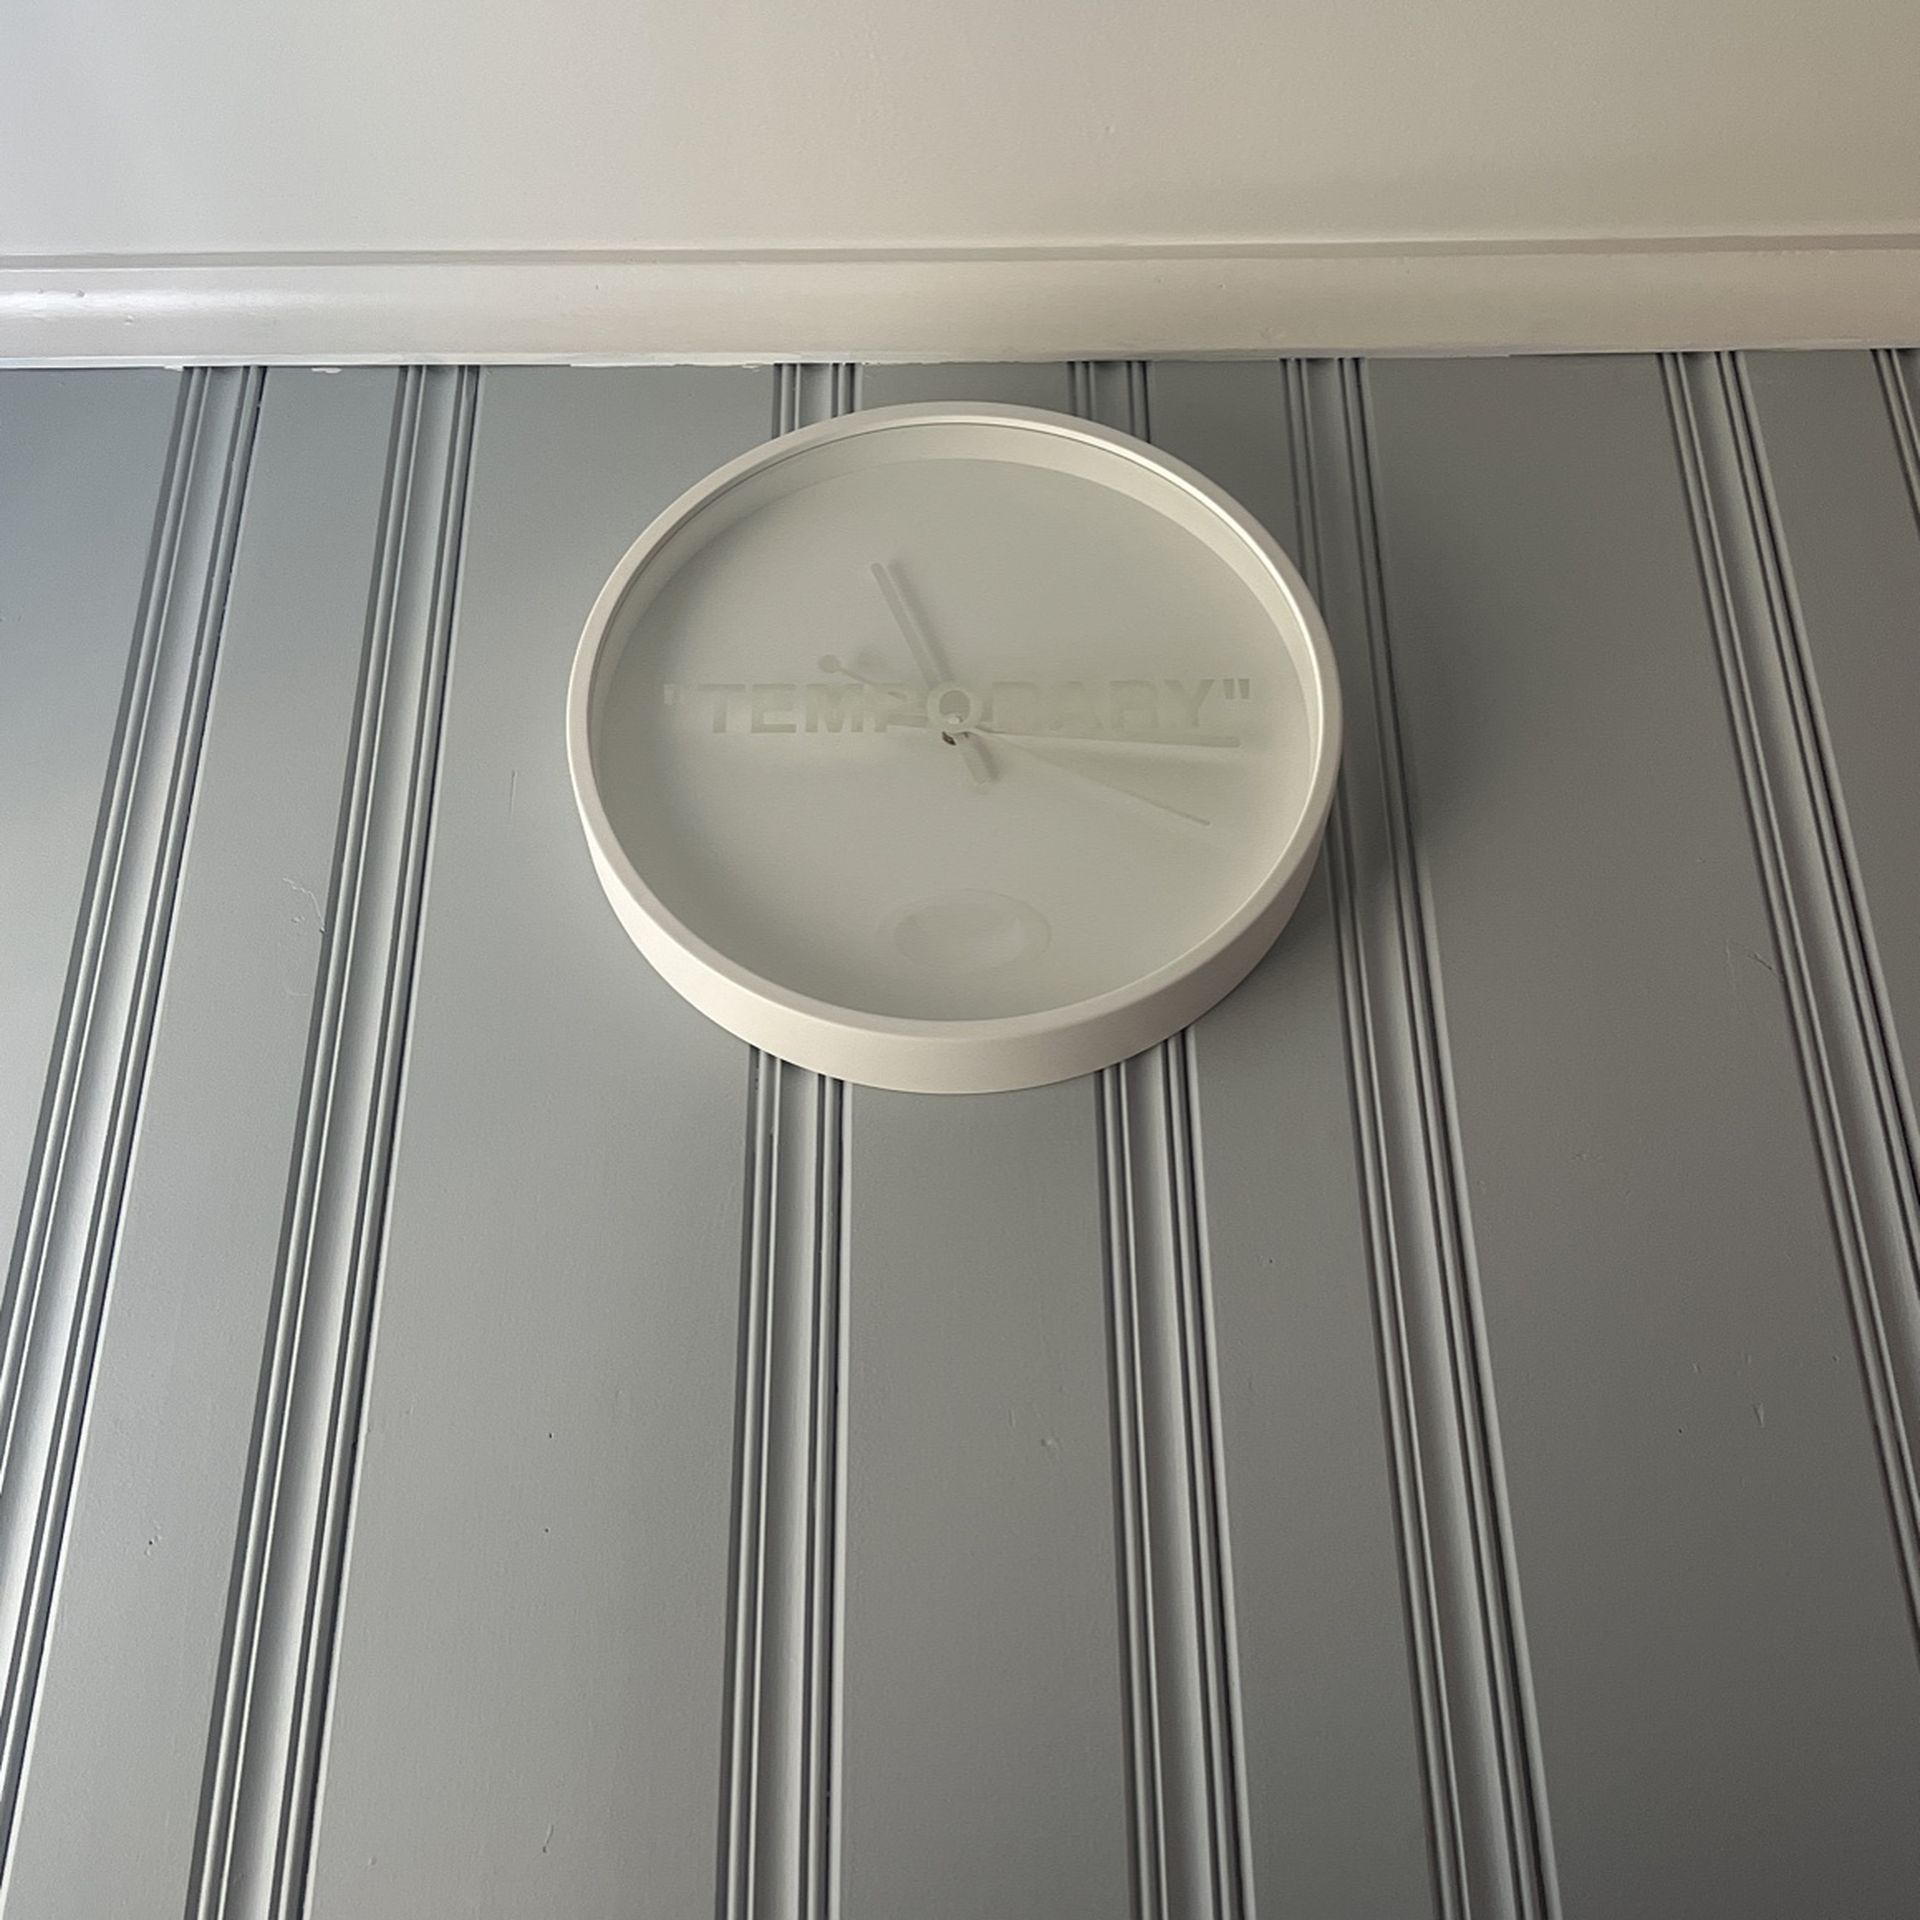 Virgil Abloh X IKEA Markerad “Temporary” Wall Clock for Sale in